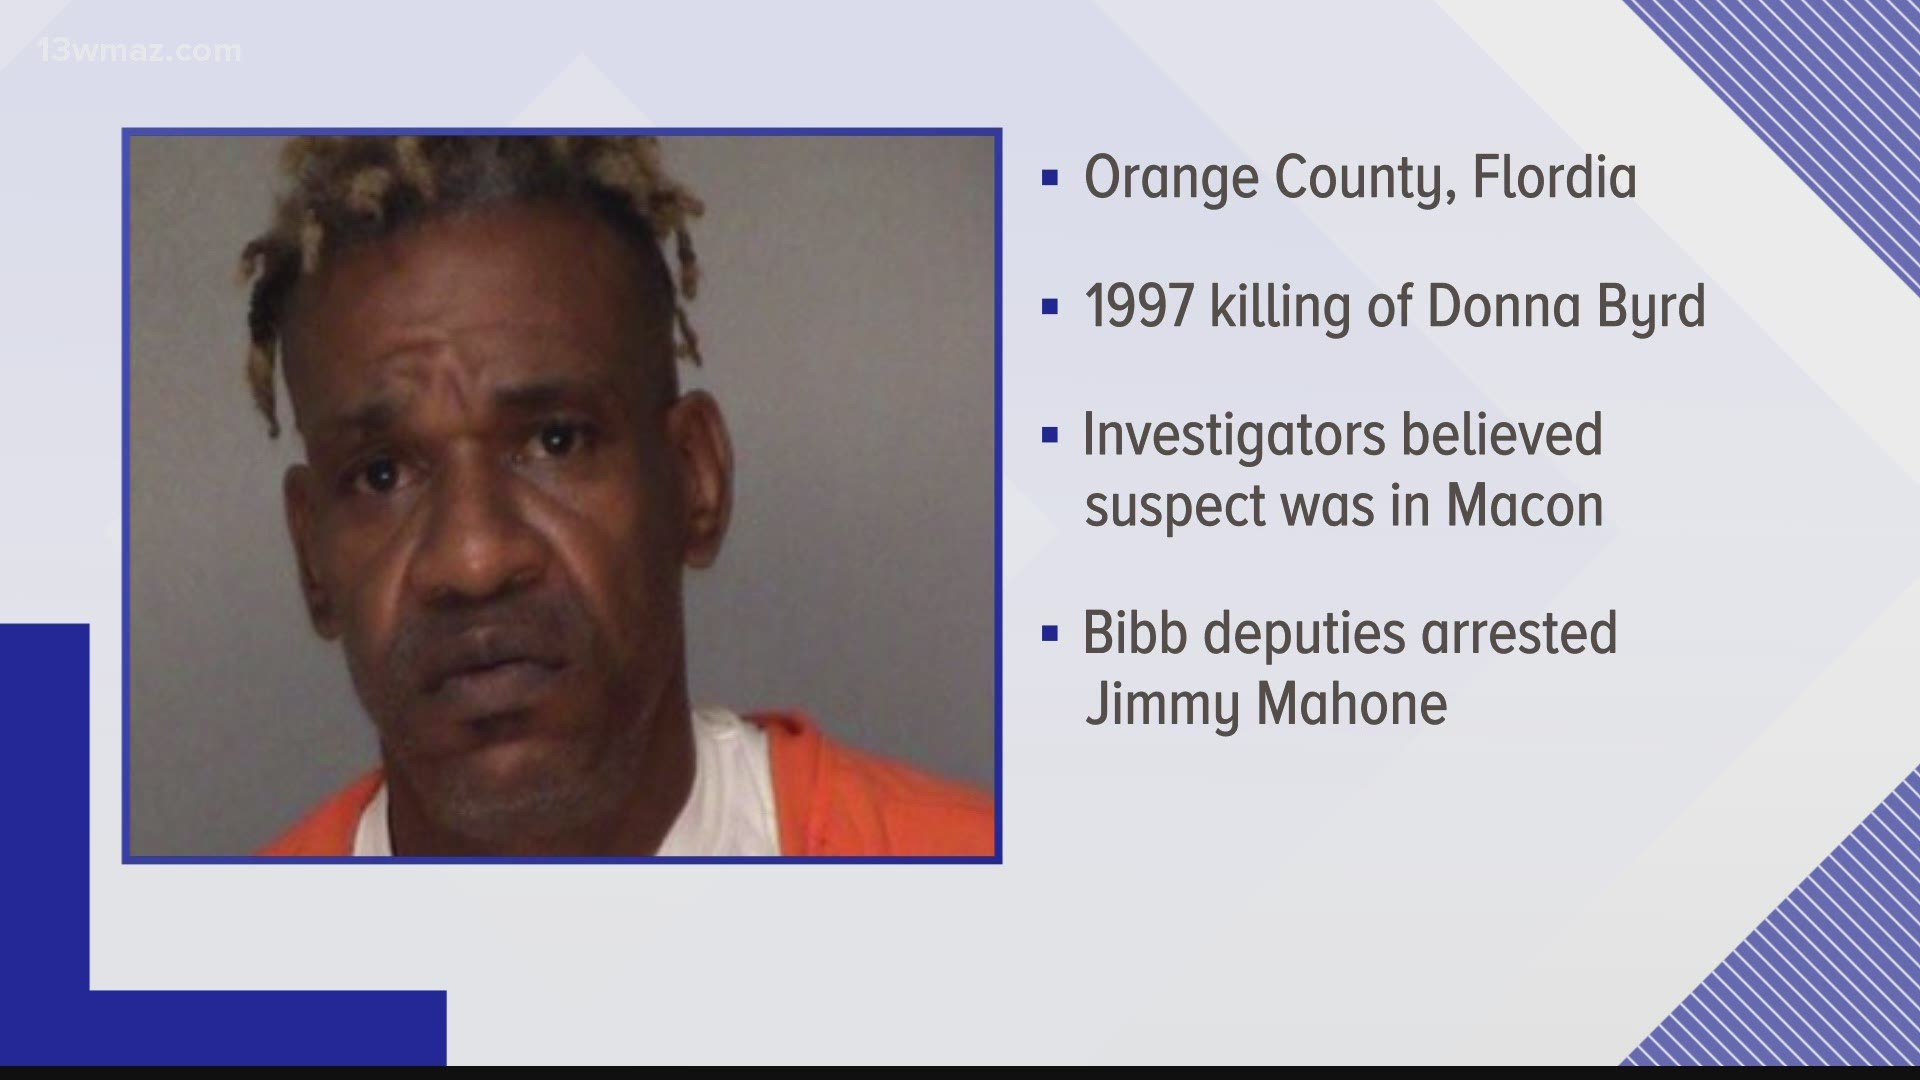 Orange County deputies contacted Bibb deputies this week and told them they had evidence that a Macon man was connected to a 1997 killing